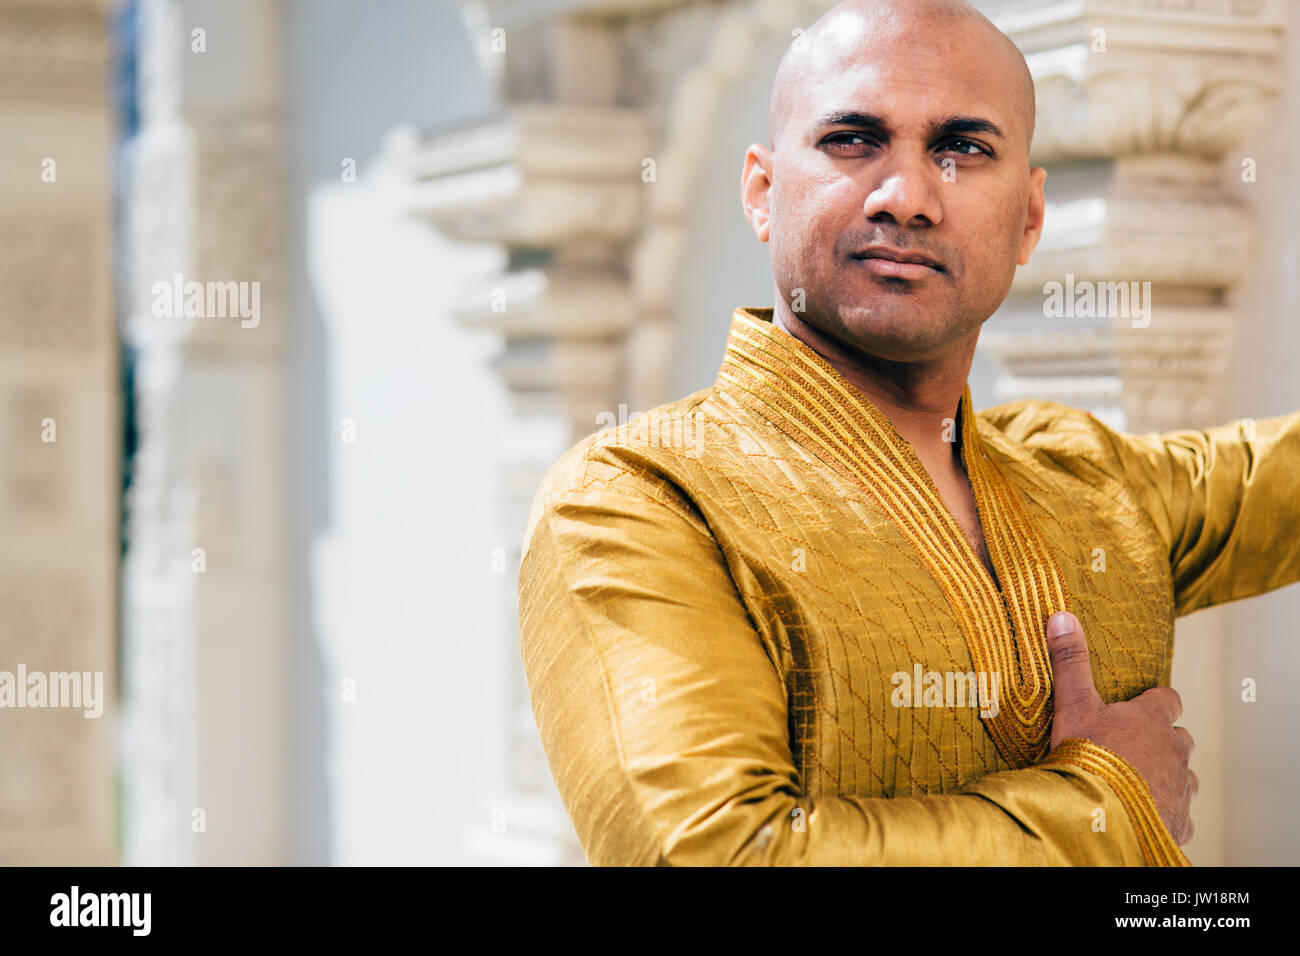 The handsome Indian man wears a gold kurta and posed at a temple. Stock Photo